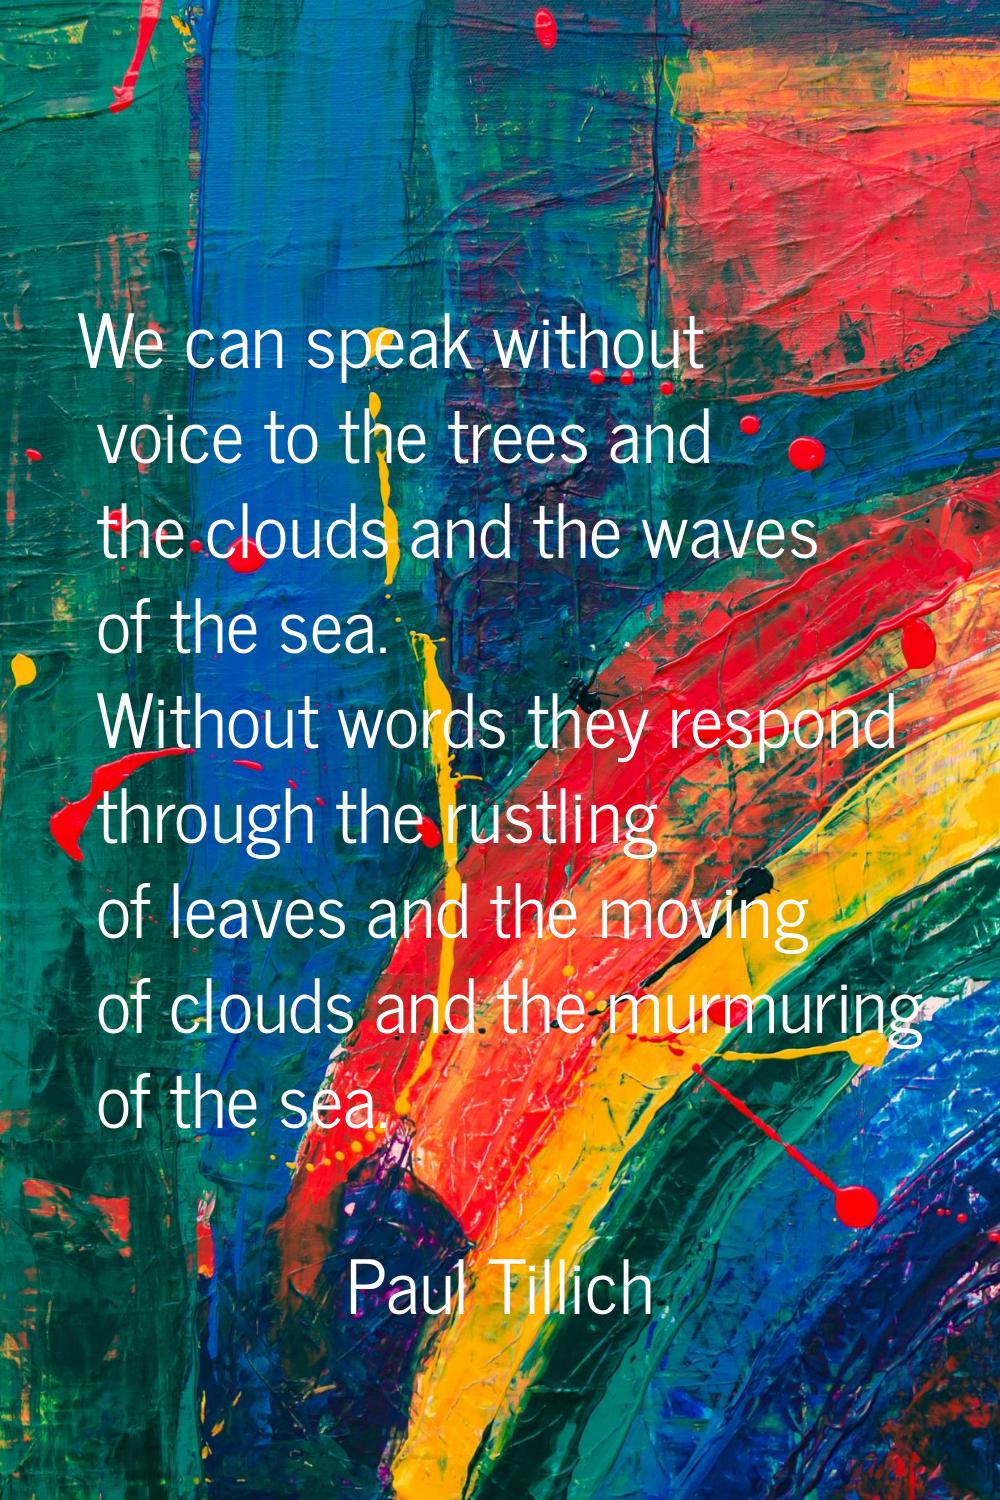 We can speak without voice to the trees and the clouds and the waves of the sea. Without words they